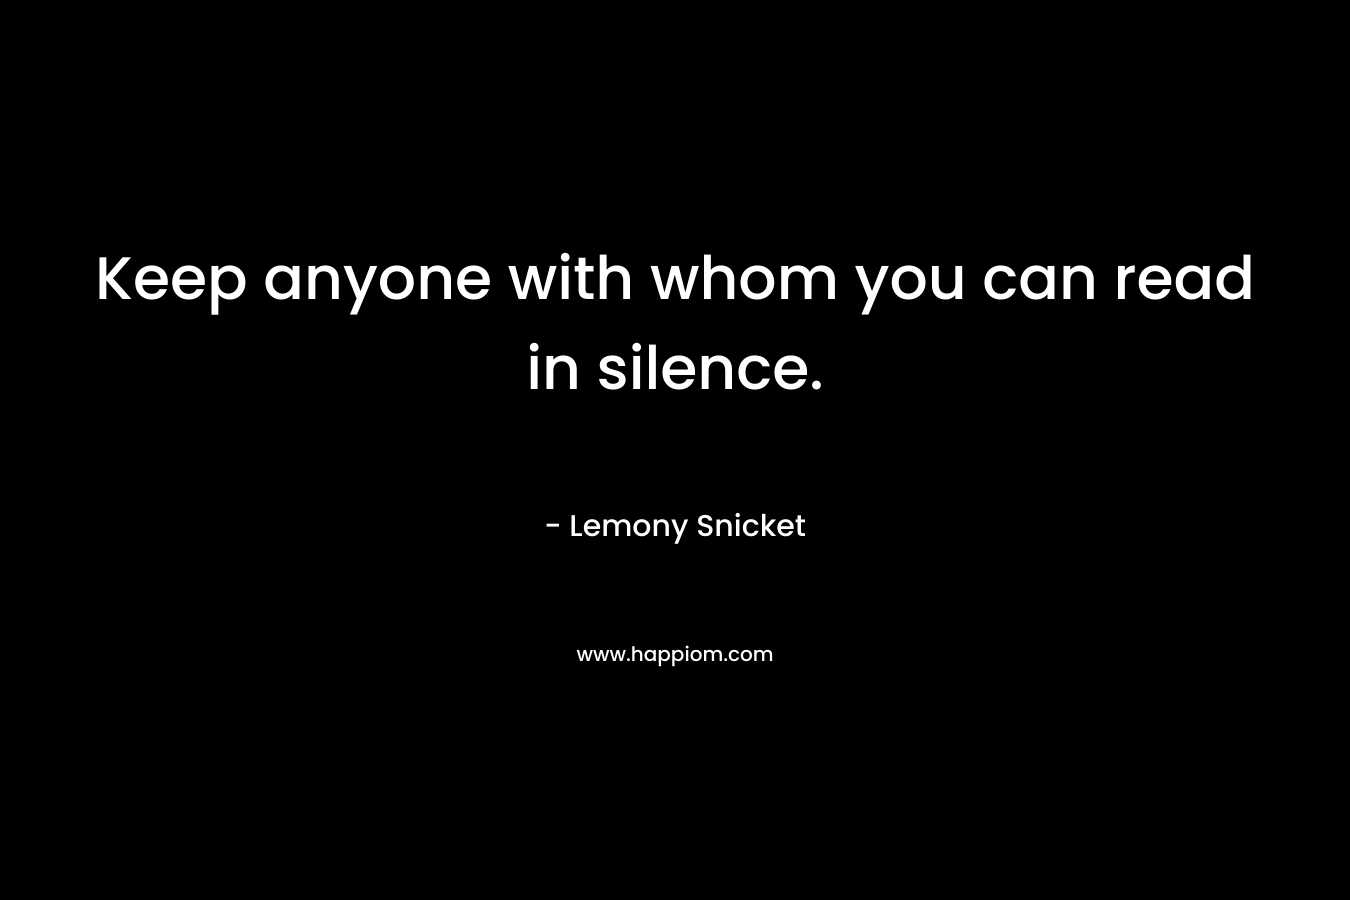 Keep anyone with whom you can read in silence.